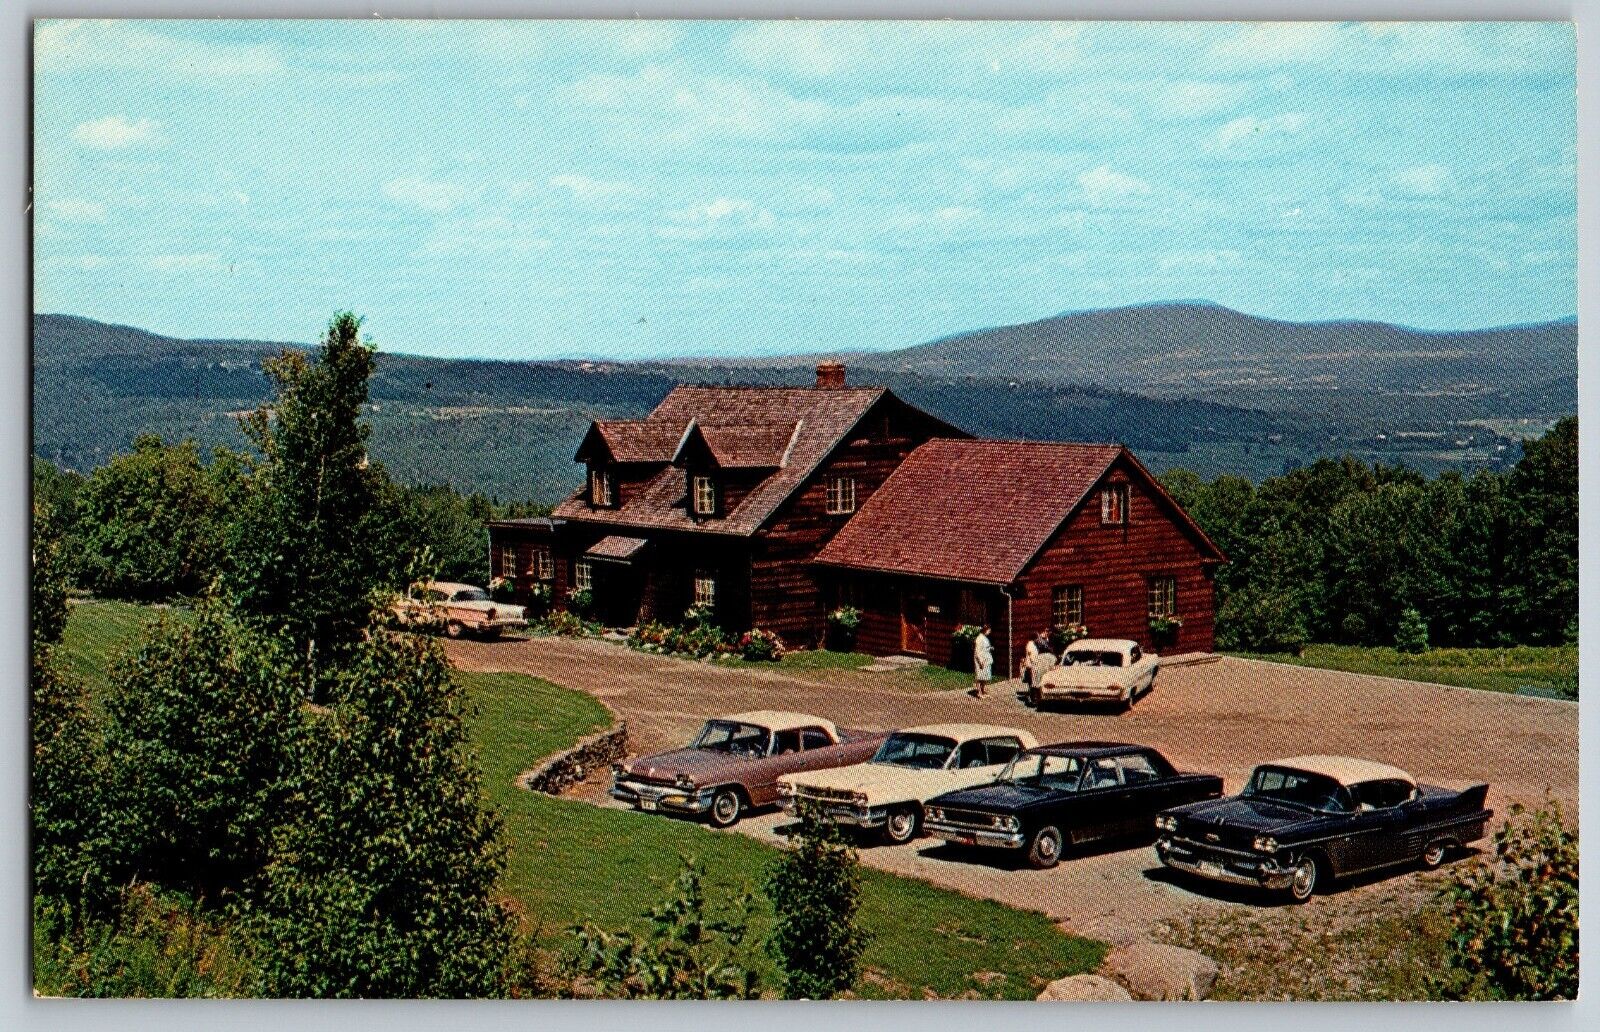 Stowe, Vermont VT - Trapp Family Book & Gift Shop - Vintage Postcard - Unposted